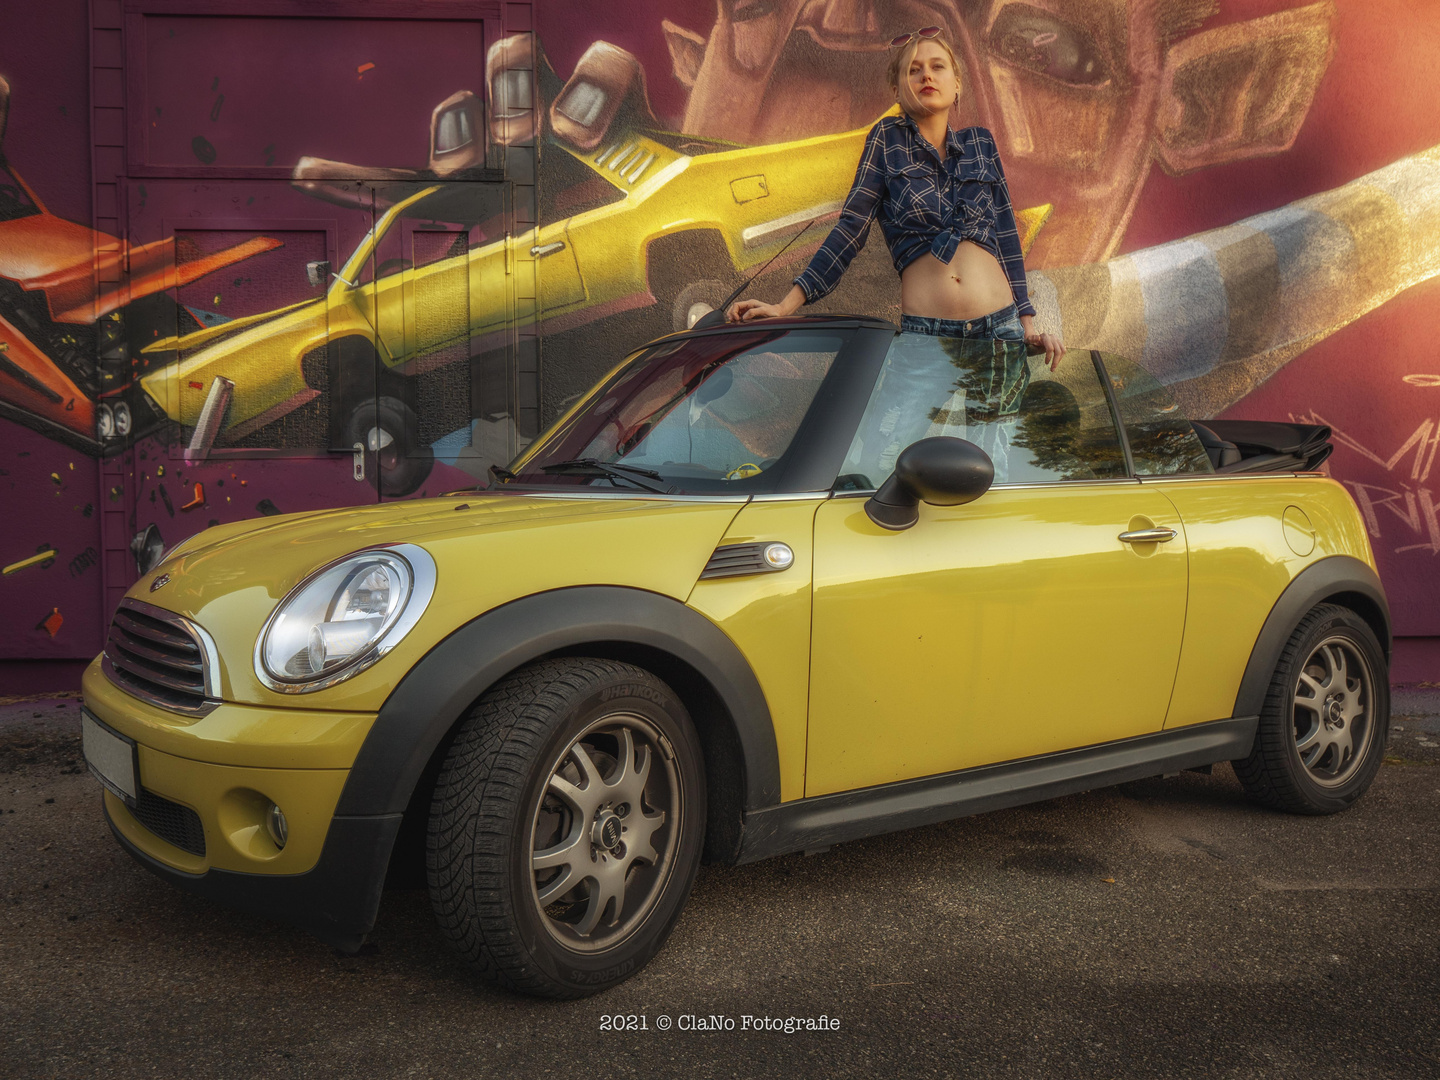 The Girl with the Mini